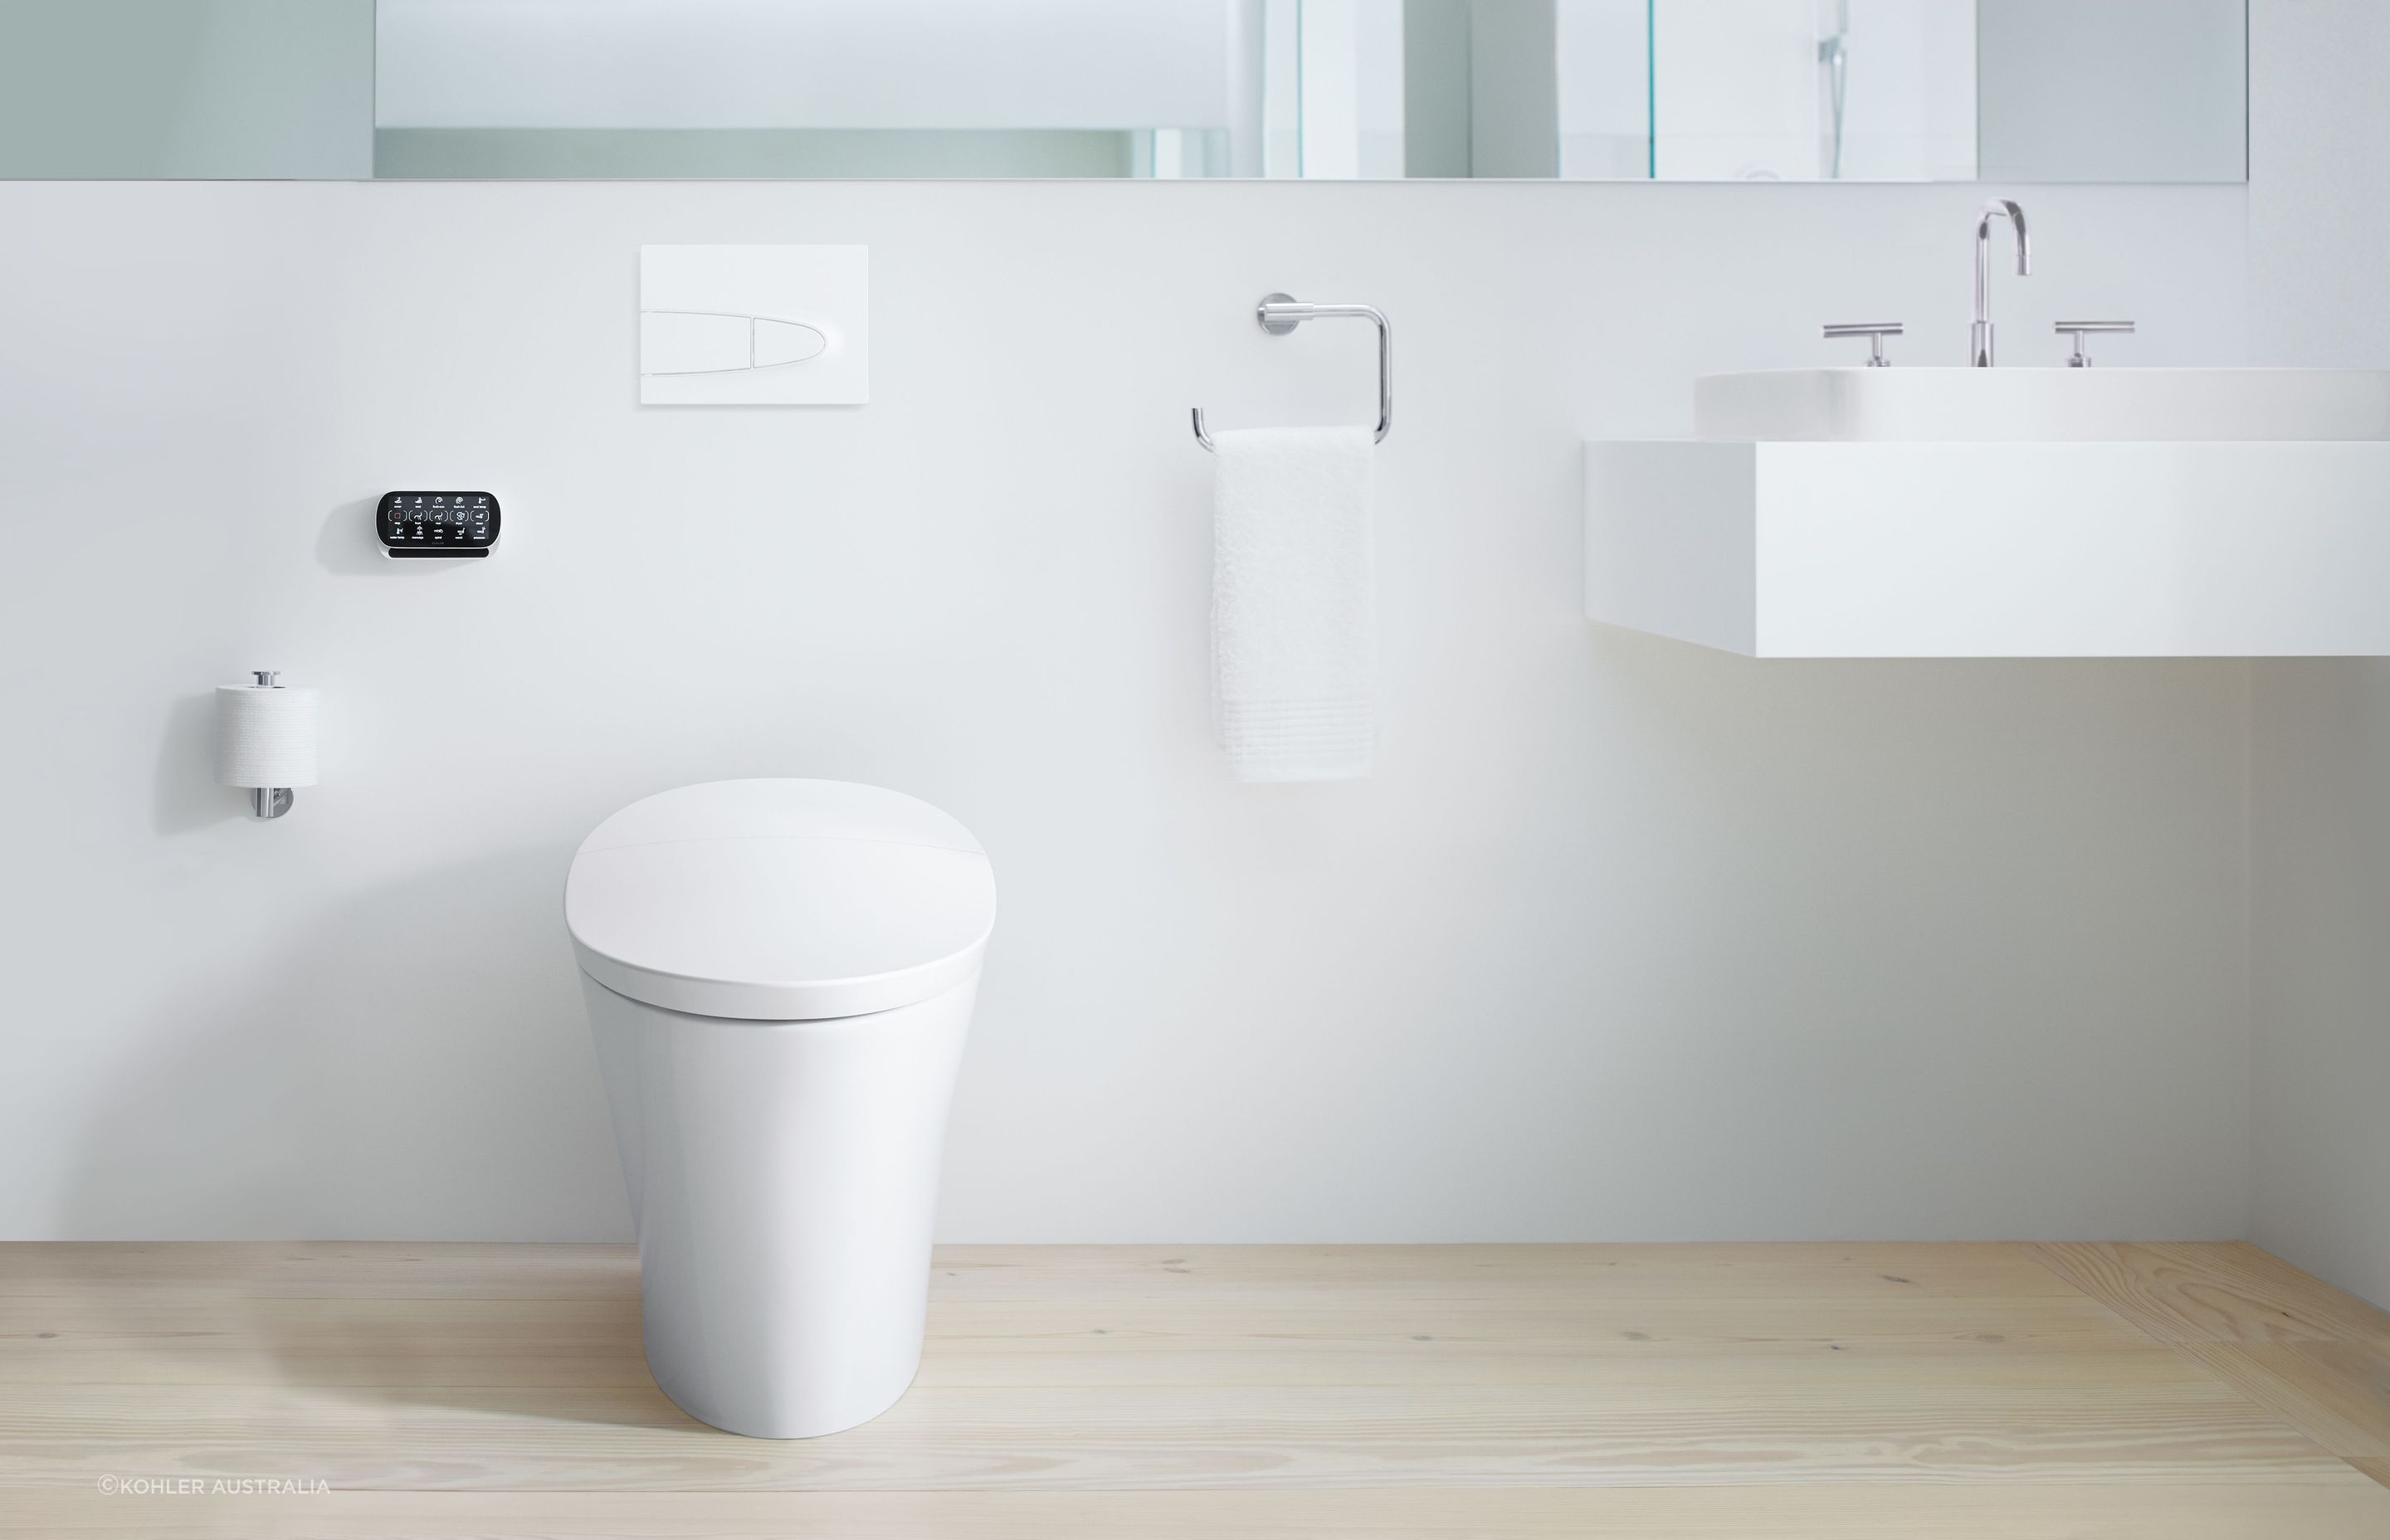  Smart toilet offers a multitude of features including heated seating, automatic flushing, bidet washing, air drying, and even self-cleaning capabilities. Featured product: Veil Wall Faced Intelligent Toilet.